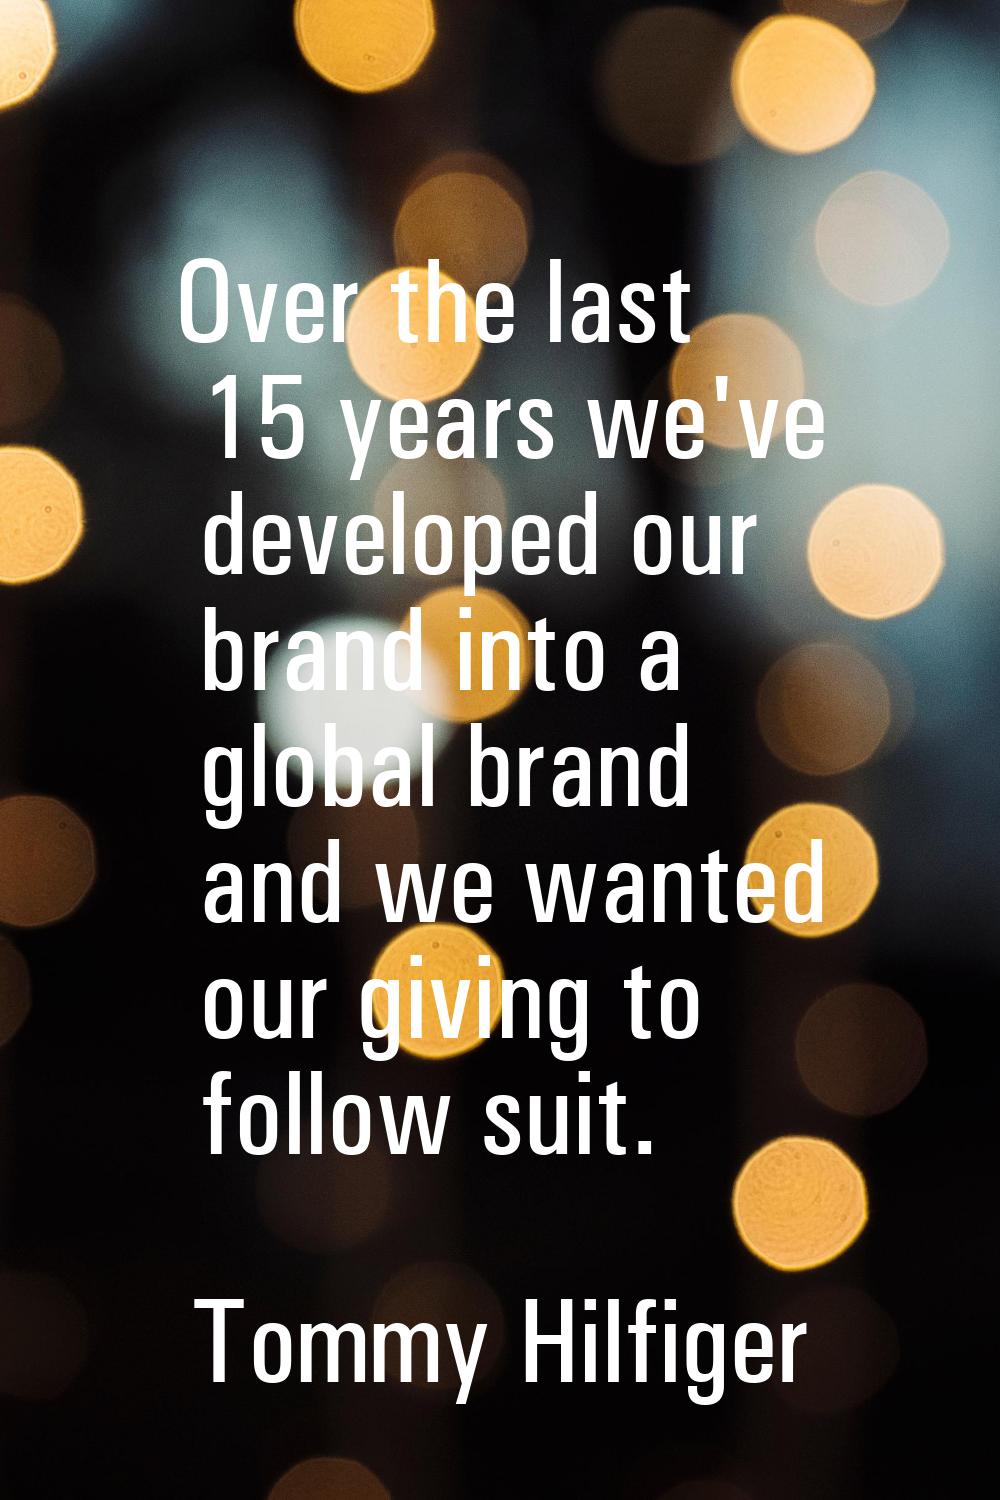 Over the last 15 years we've developed our brand into a global brand and we wanted our giving to fo